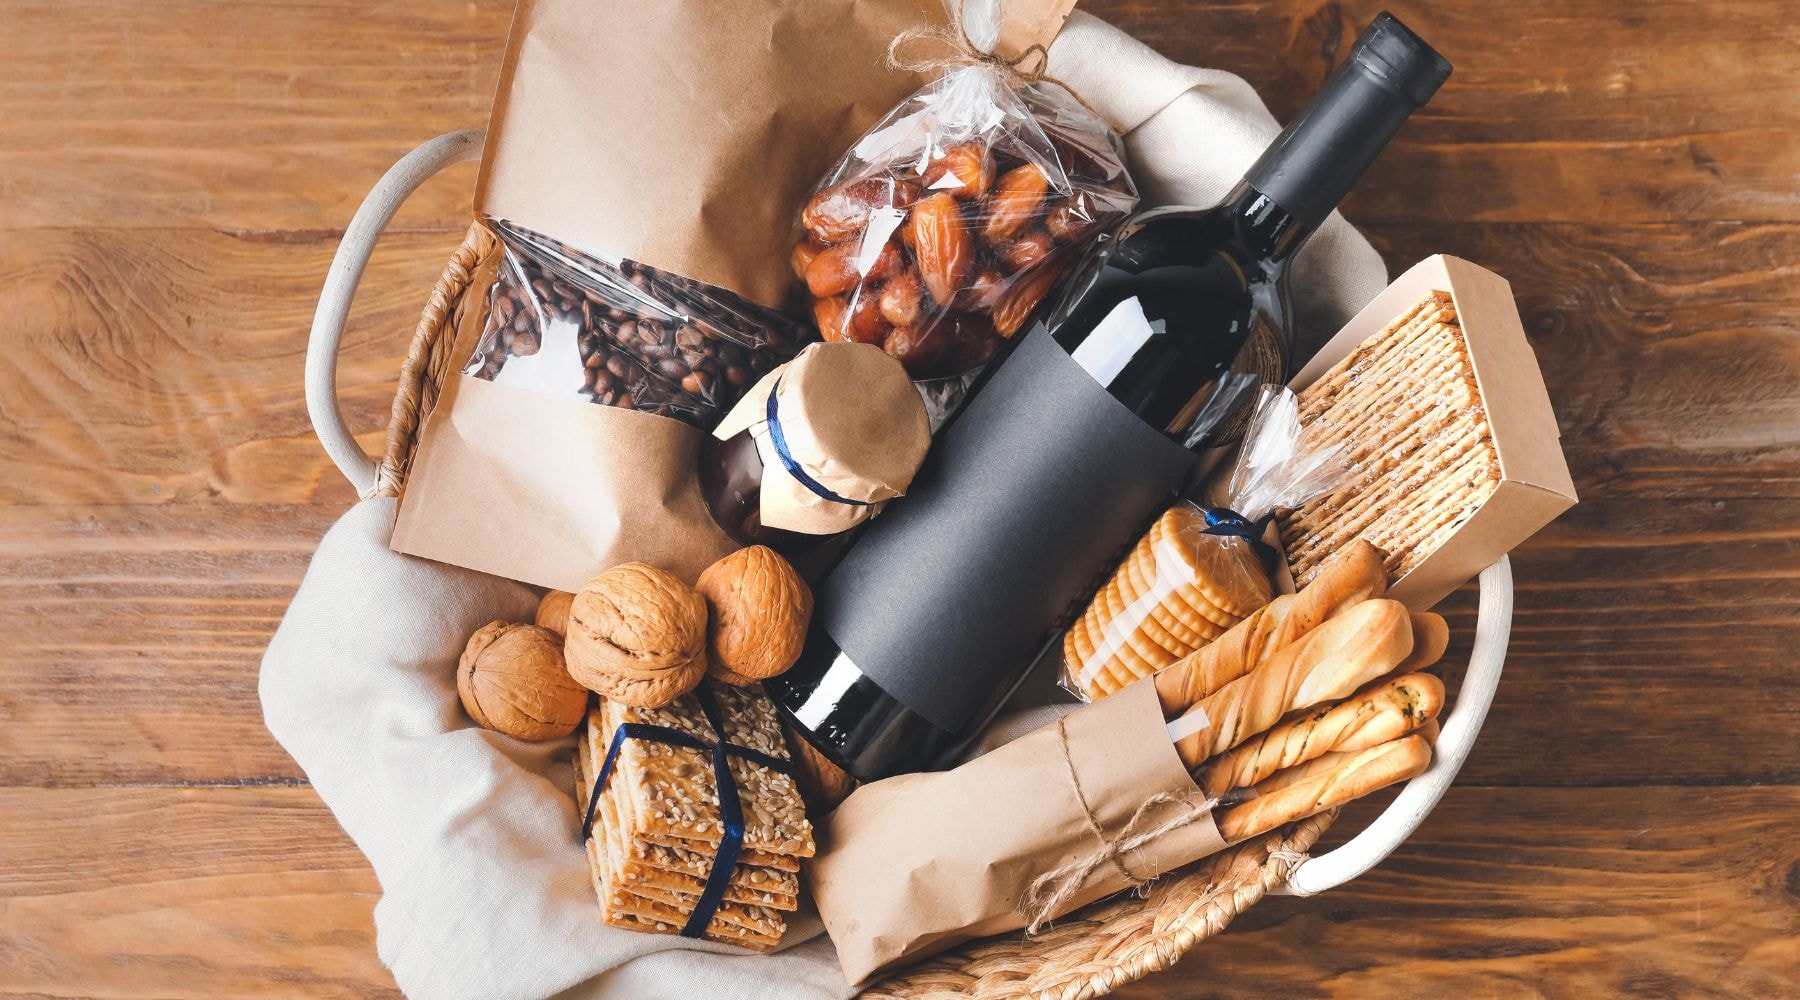 Basket with wine, snacks, and packed goods on wooden surface.